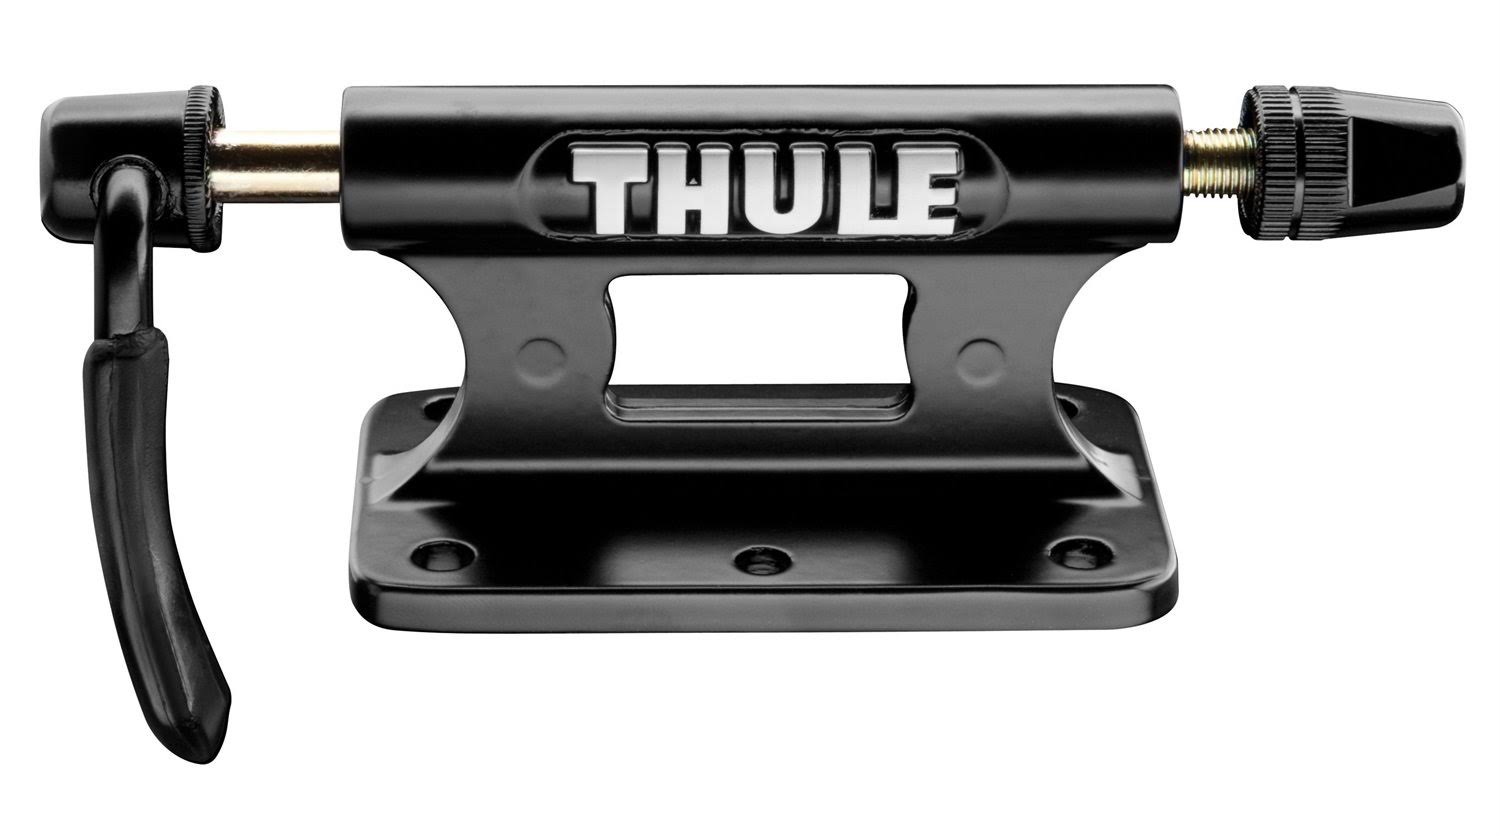 Thule 821 Low Rider Bicycle Fork Mount